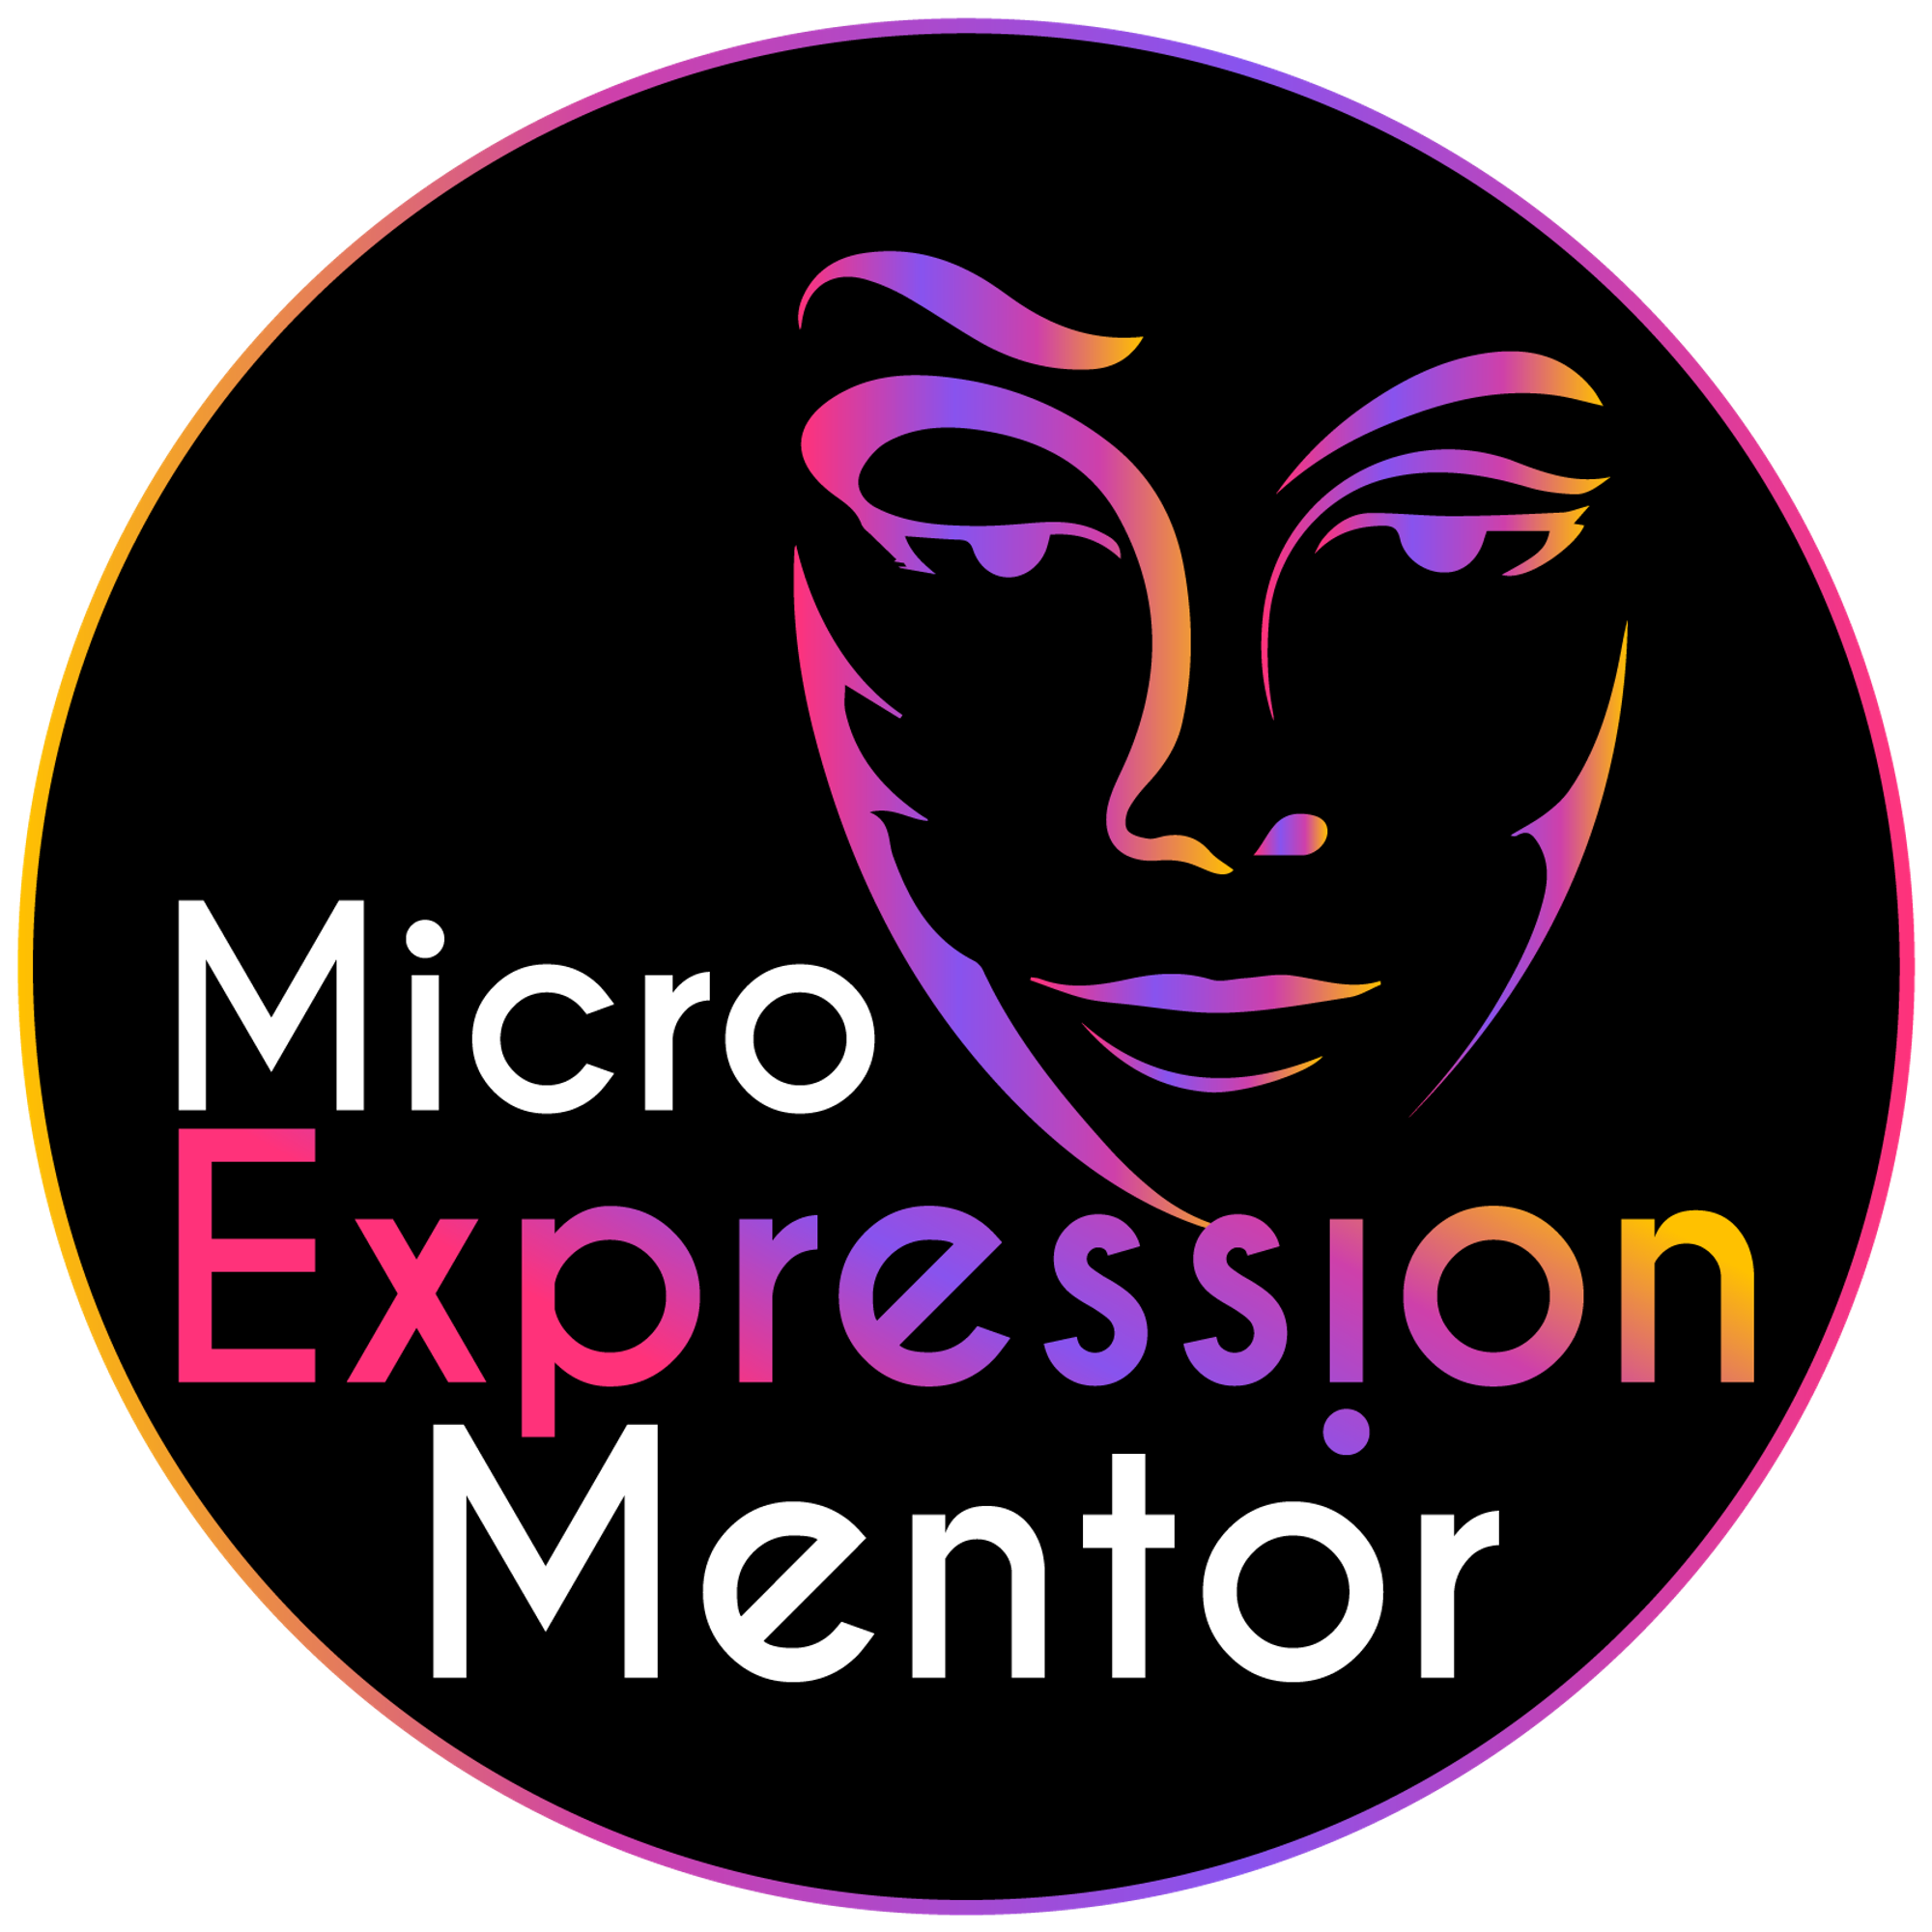 Micro Expression Mentor